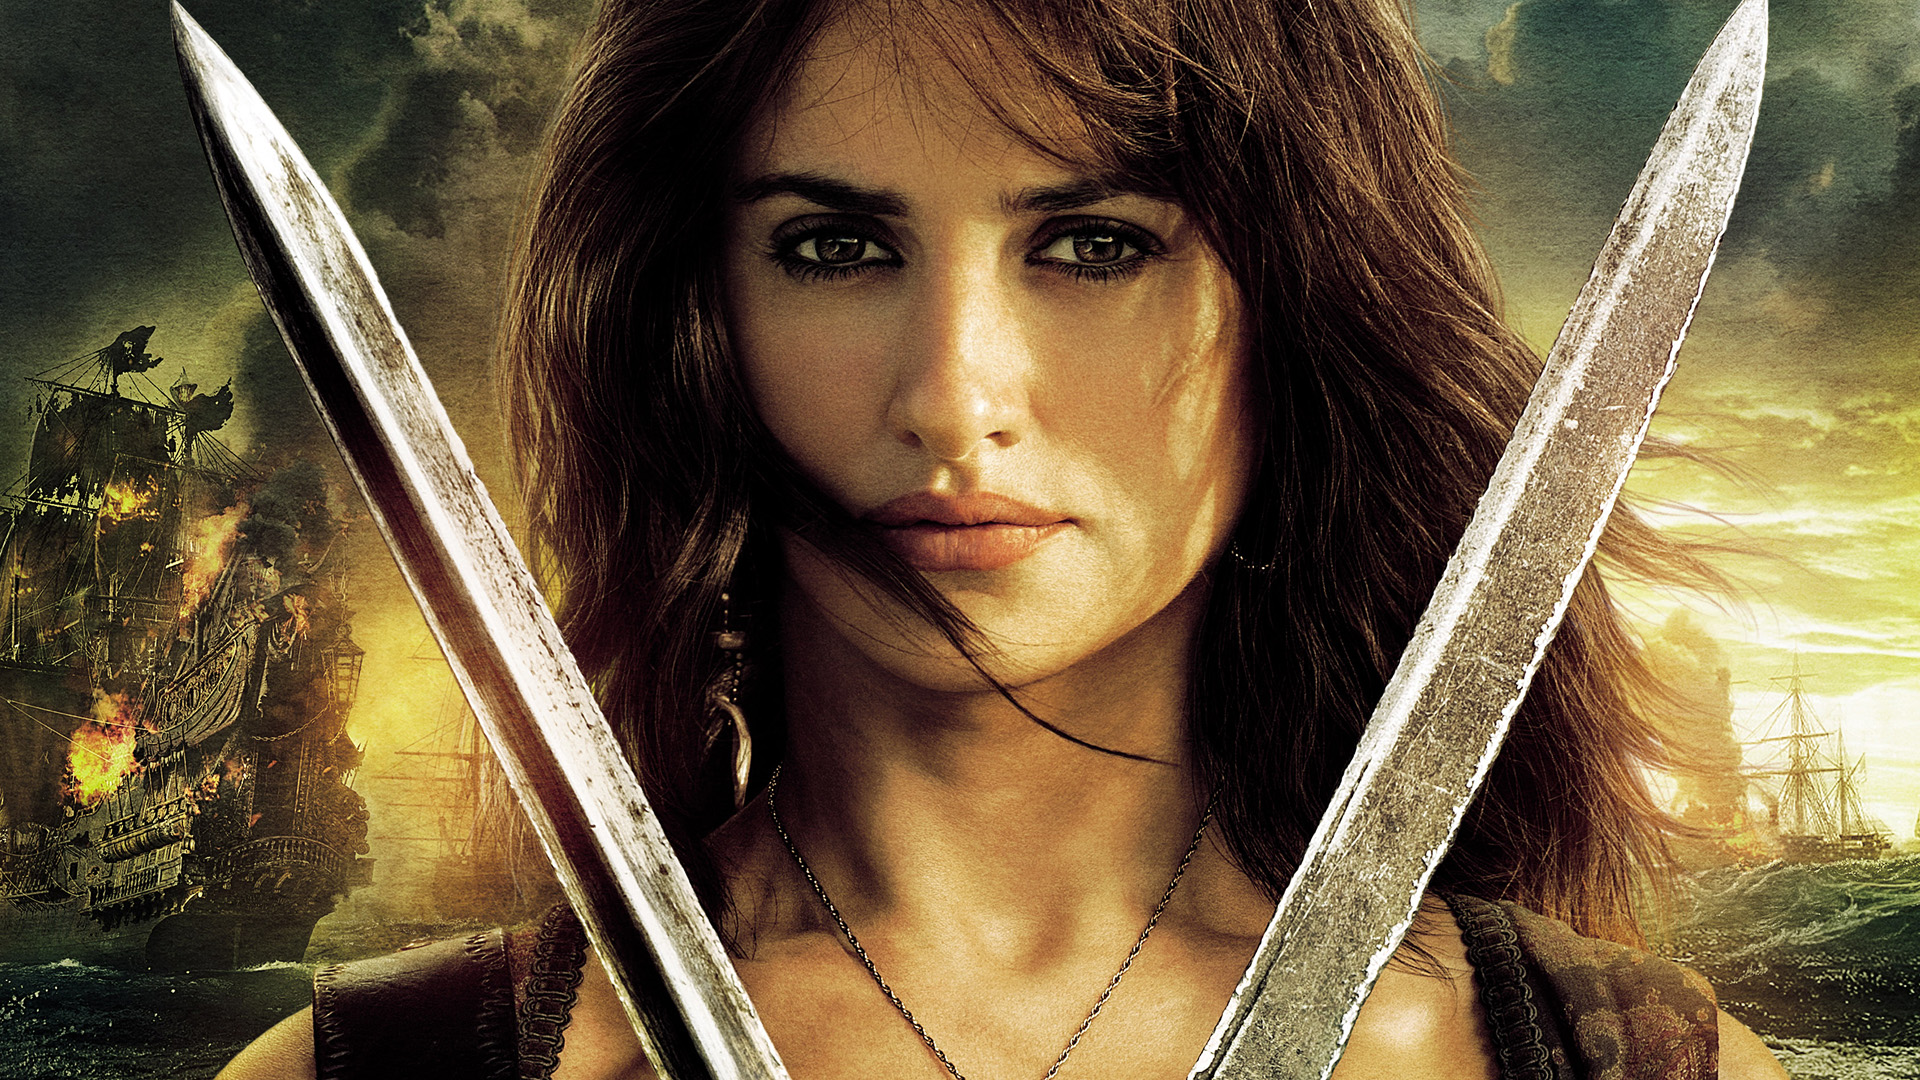 penelope cruz, movie, pirates of the caribbean: on stranger tides, angelica teach, pirates of the caribbean